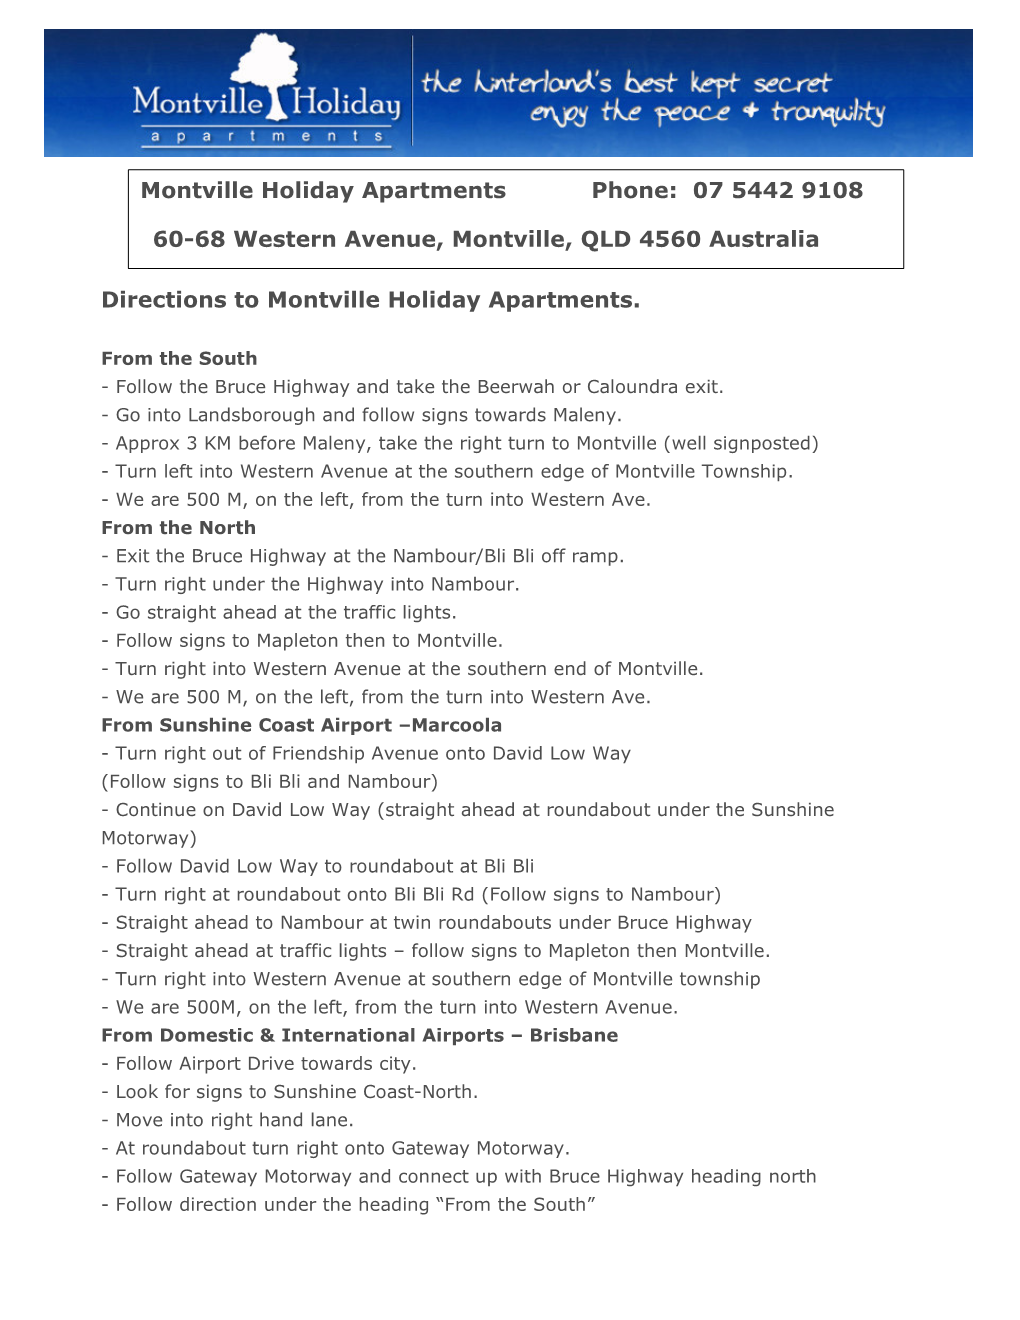 Directions to Montville Holiday Apartments. Montville Holiday Apartments Phone: 07 5442 9108 60-68 Western Avenue, Montville